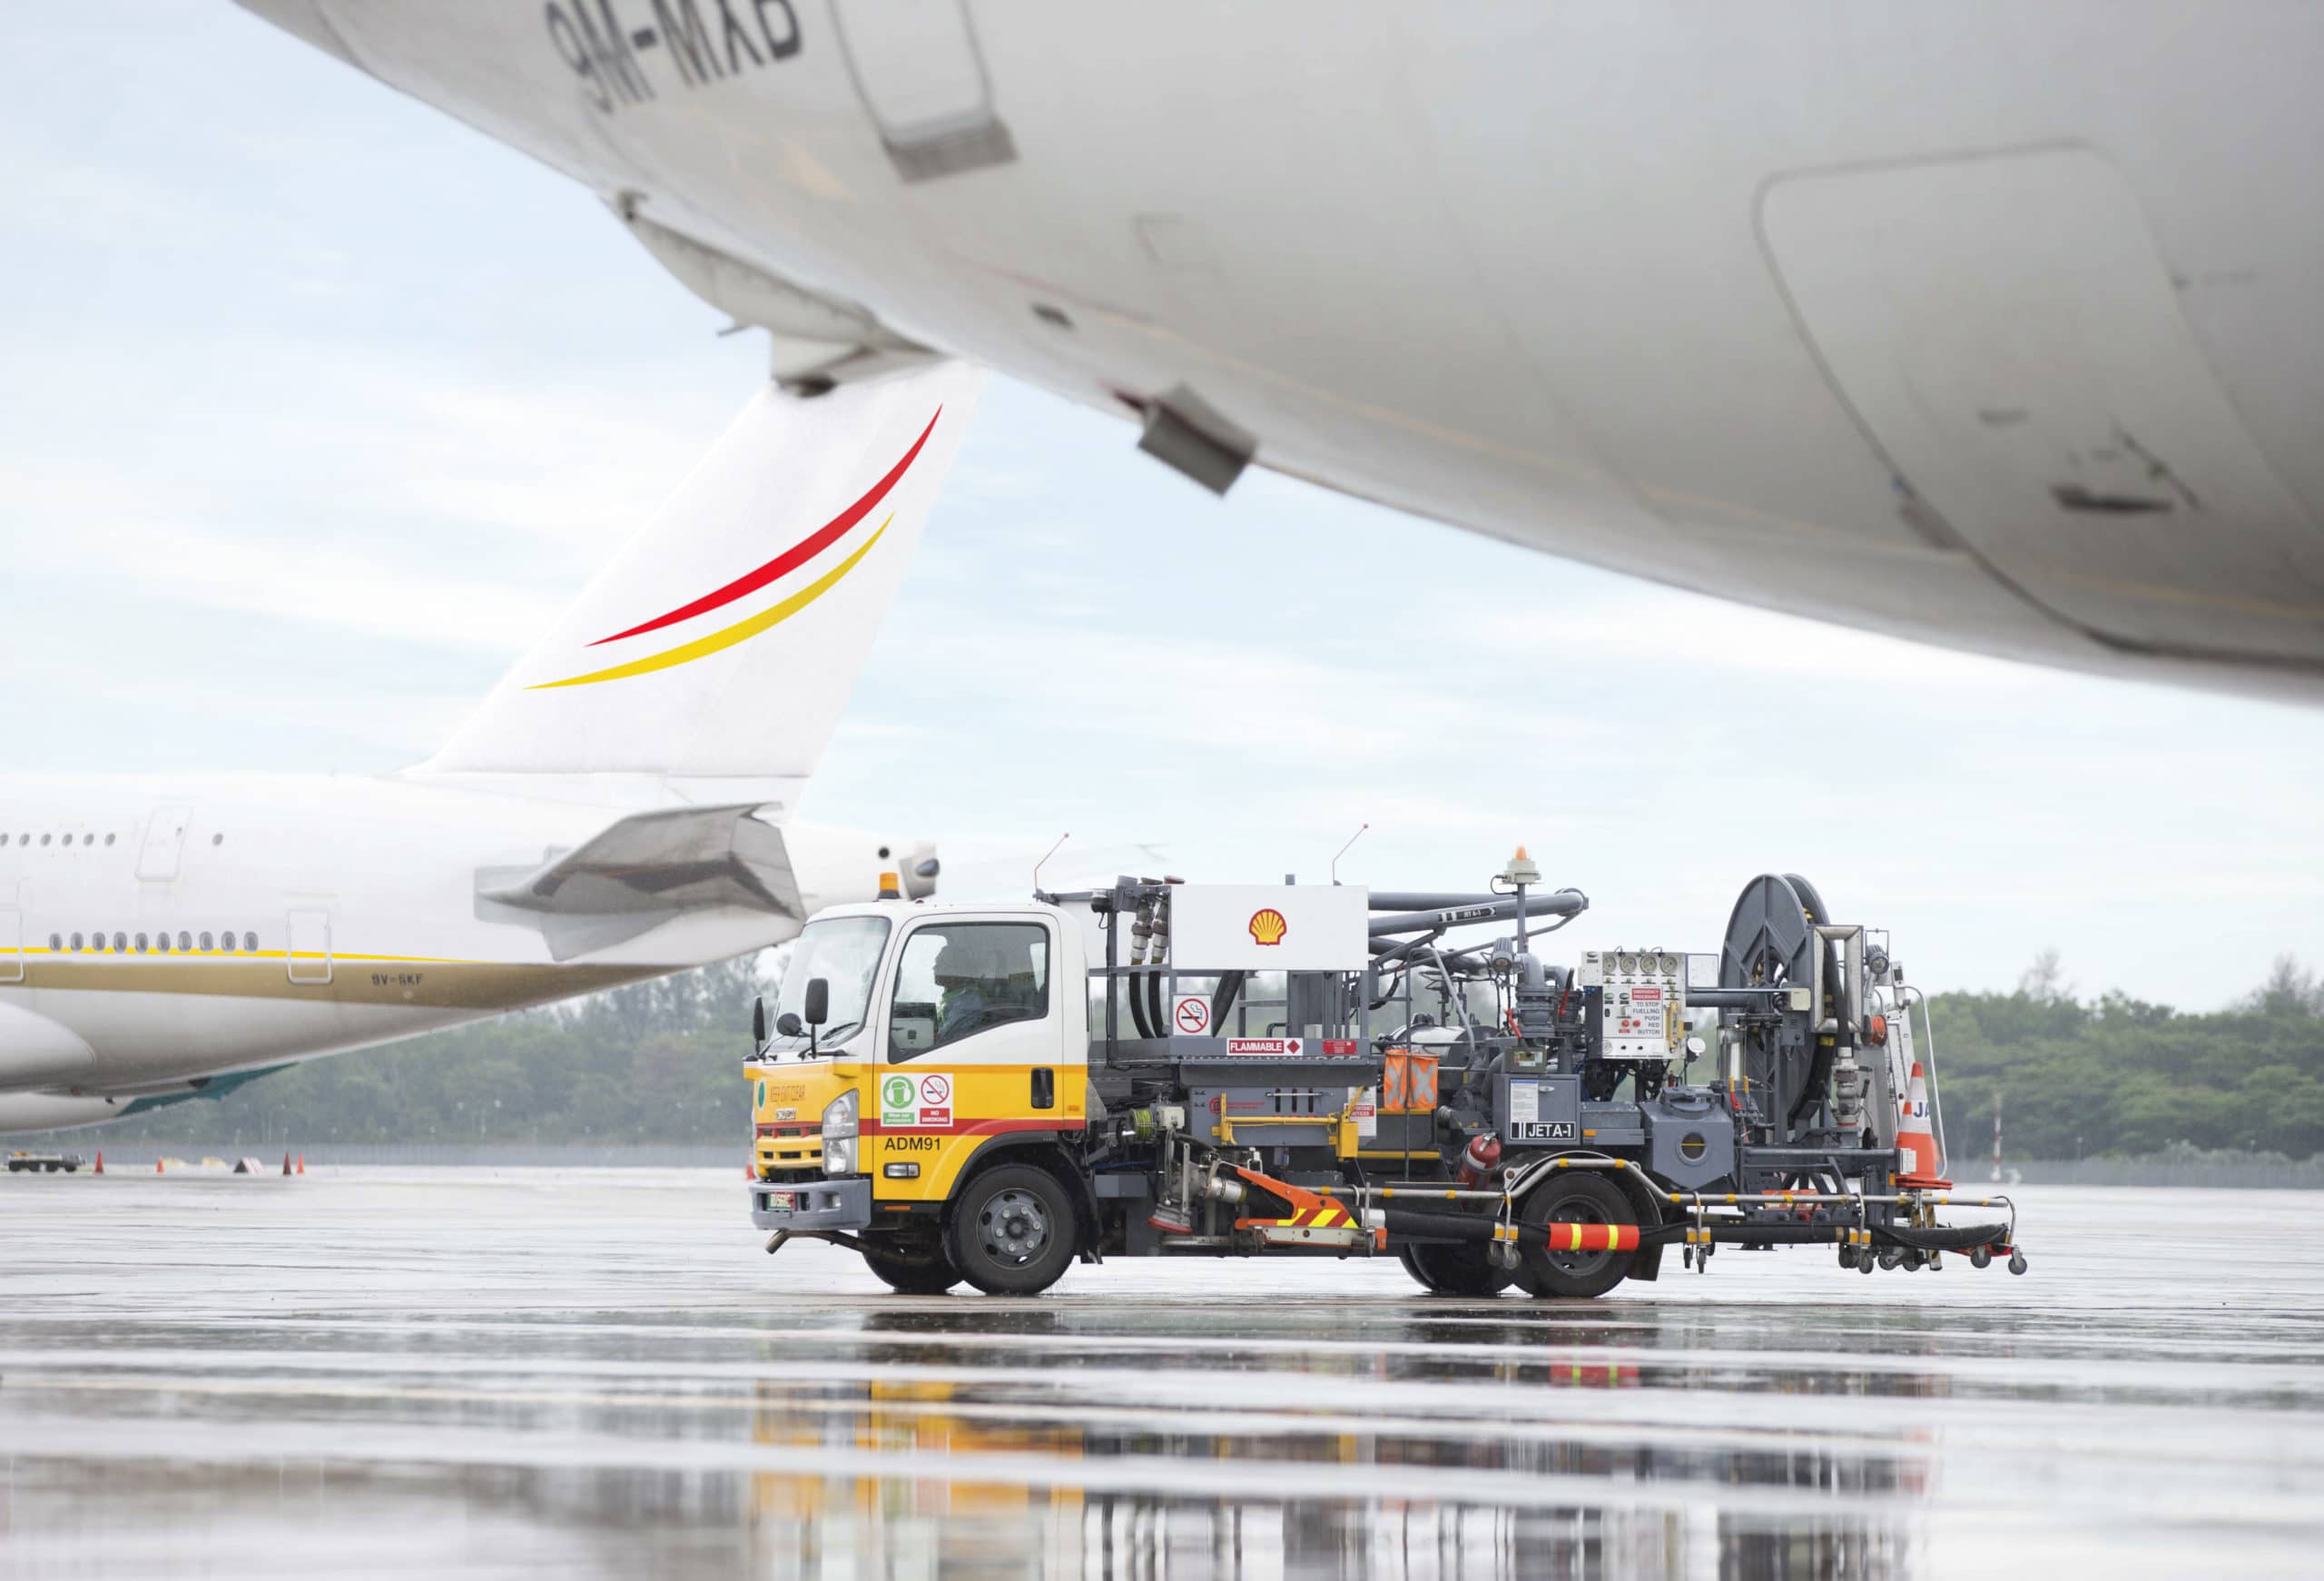 Shell Aviation into-plane refueling operations at Singapore Changi Airport, 2014. Photo courtesy of Shell.